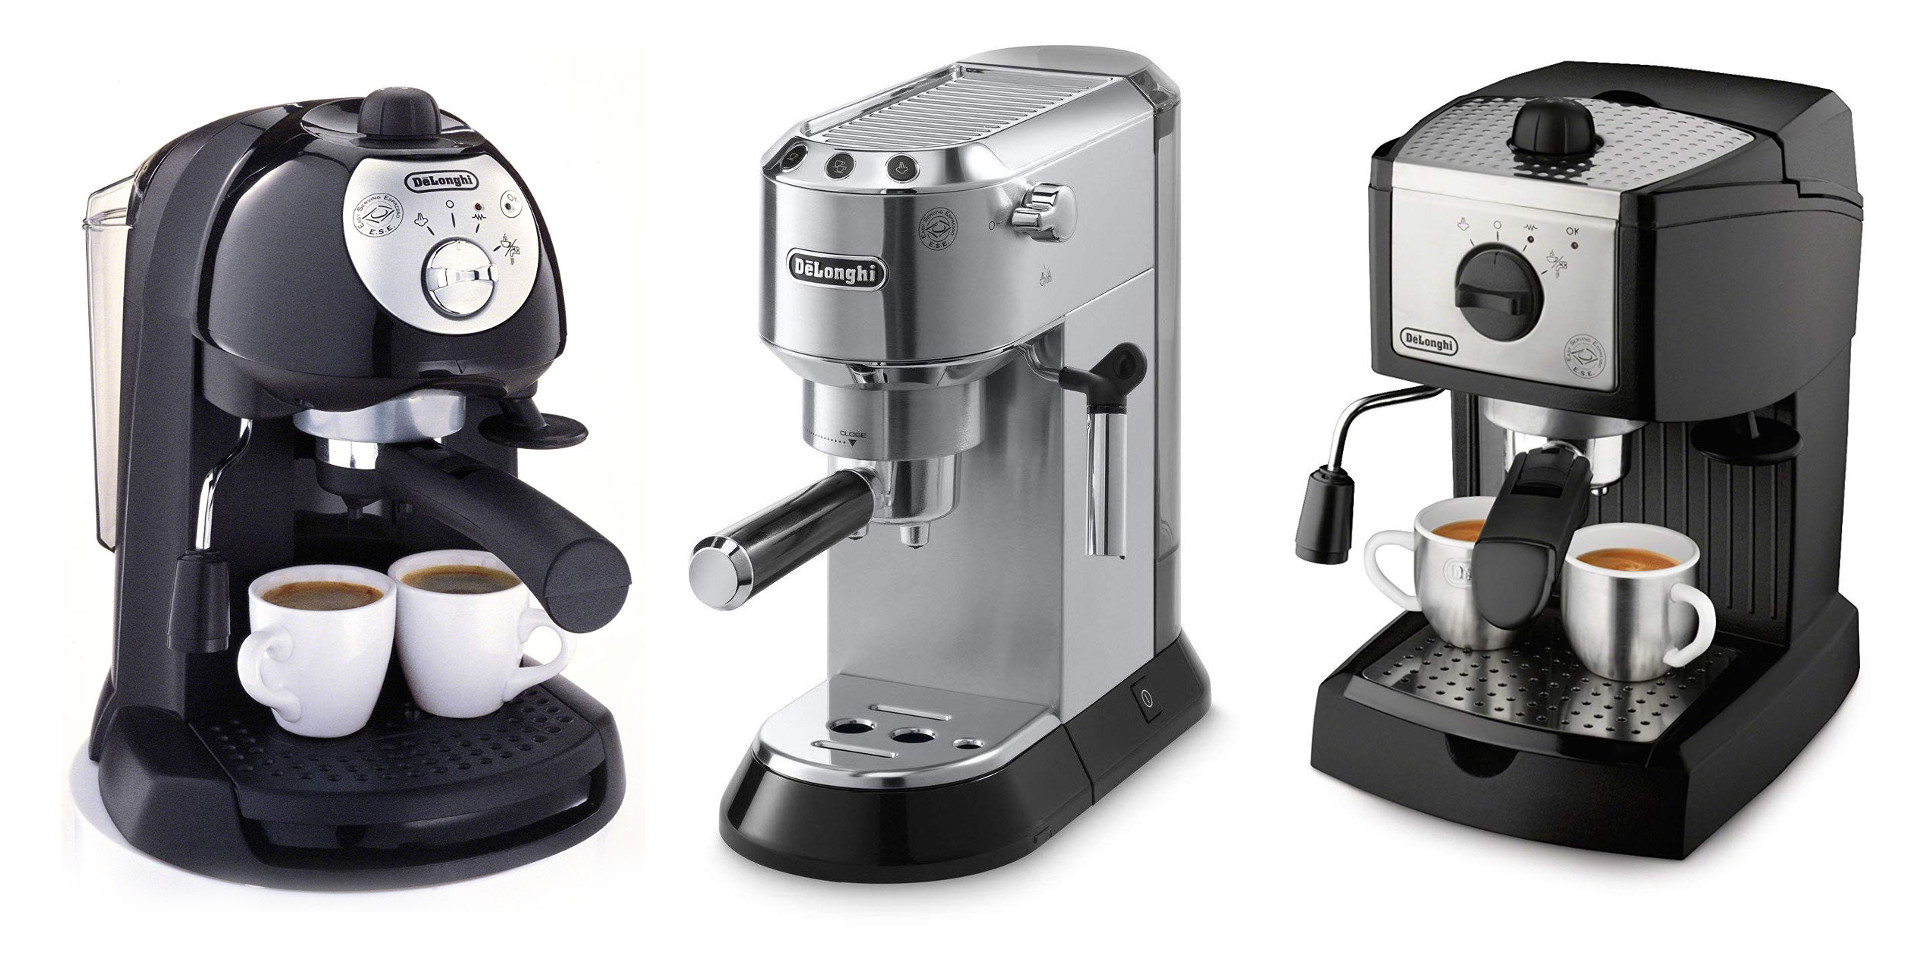 Get Barista Style Coffee W A Delonghi Espresso Maker From 60 Up To 70 Off 9to5toys,Bean Curd With Garlic Sauce